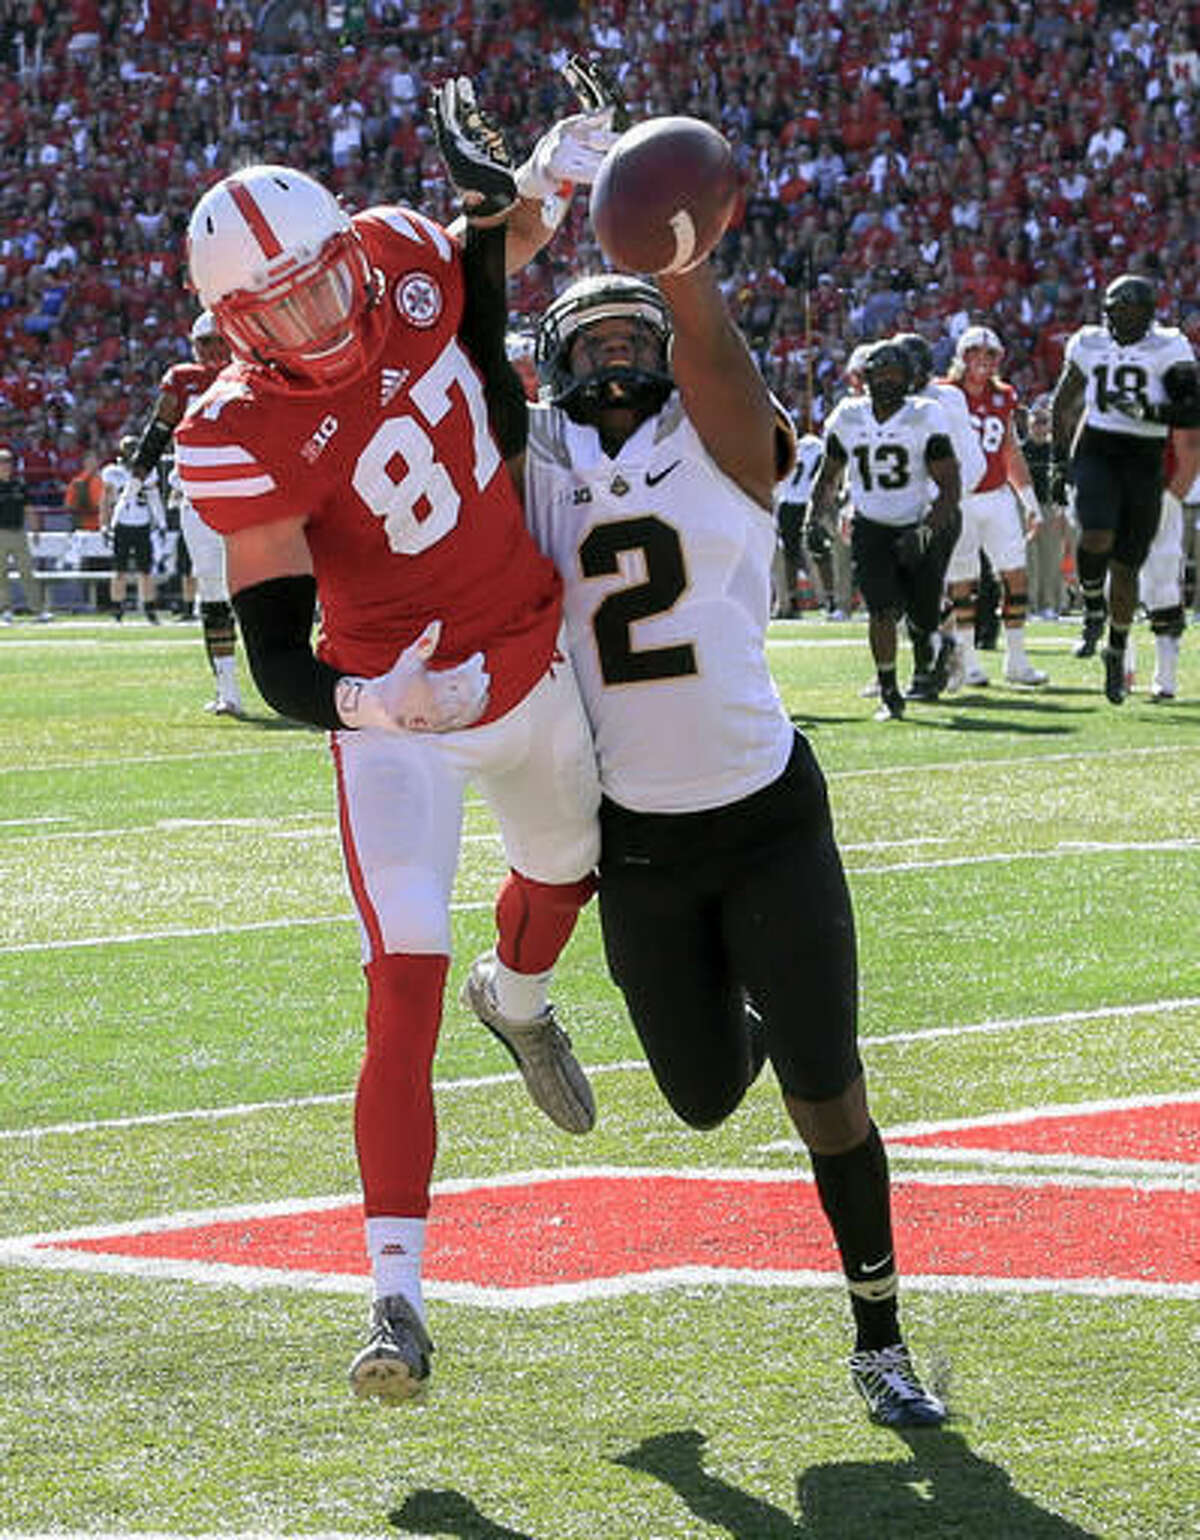 Purdue cornerback Da'Wan Hunte (2) breaks up a pass intended for Nebraska wide receiver Brandon Reilly (87) during the first half of an NCAA college football game in Lincoln, Neb., Saturday, Oct. 22, 2016. (AP Photo/Nati Harnik)